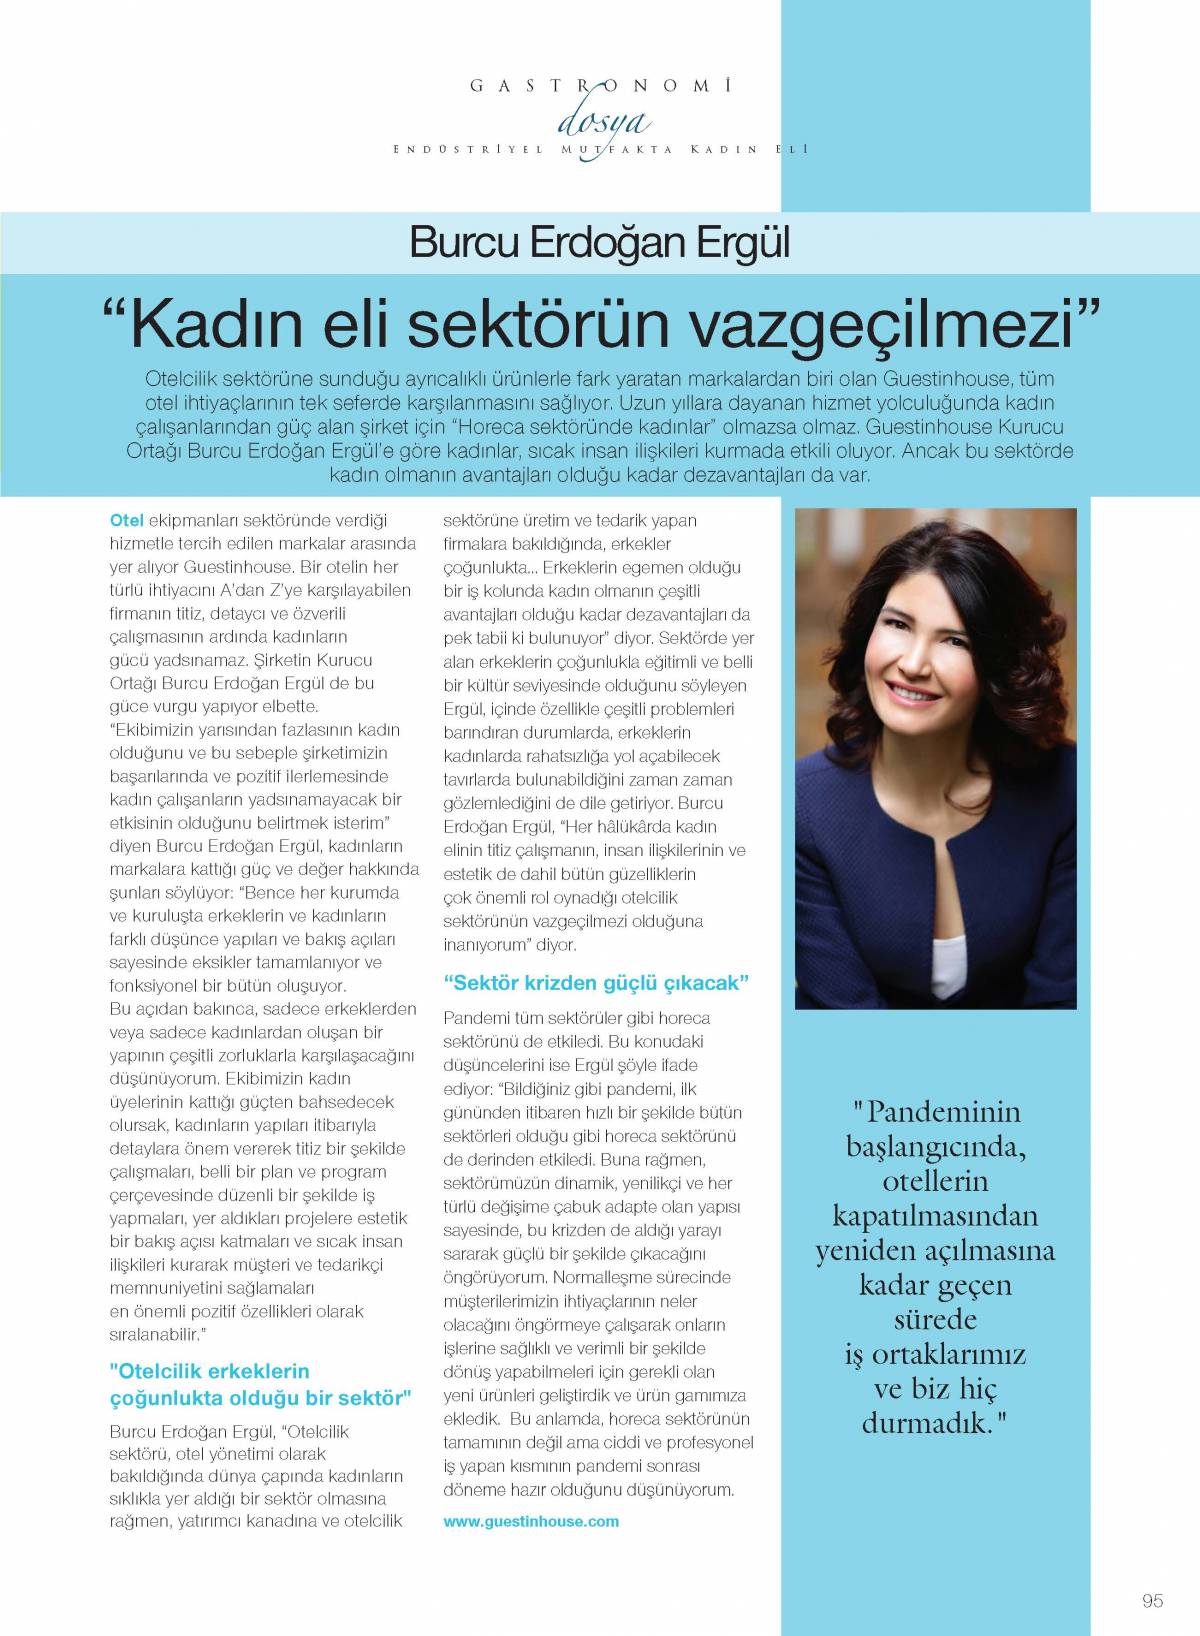 Interview about Women`s Indispensable Role in Hospitality Industry